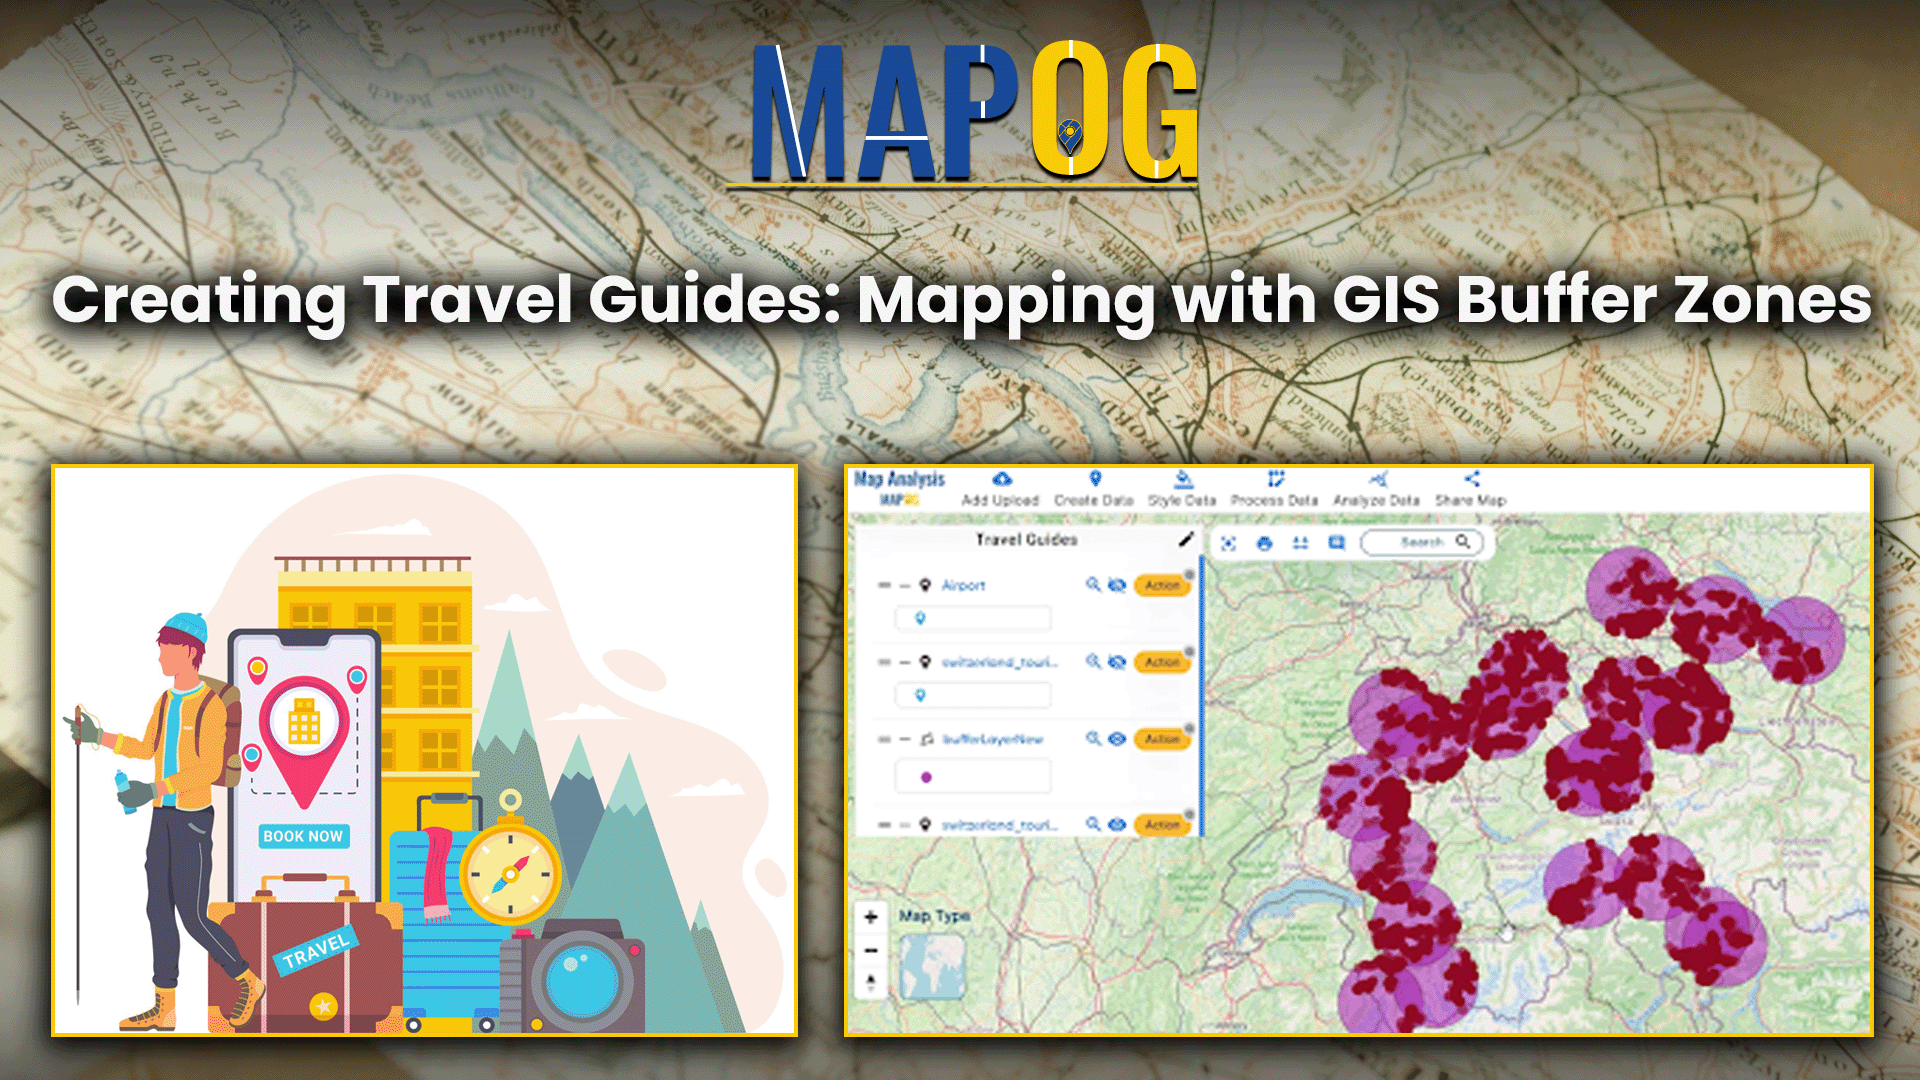 Creating Travel Guides: Mapping with GIS Buffer Zones